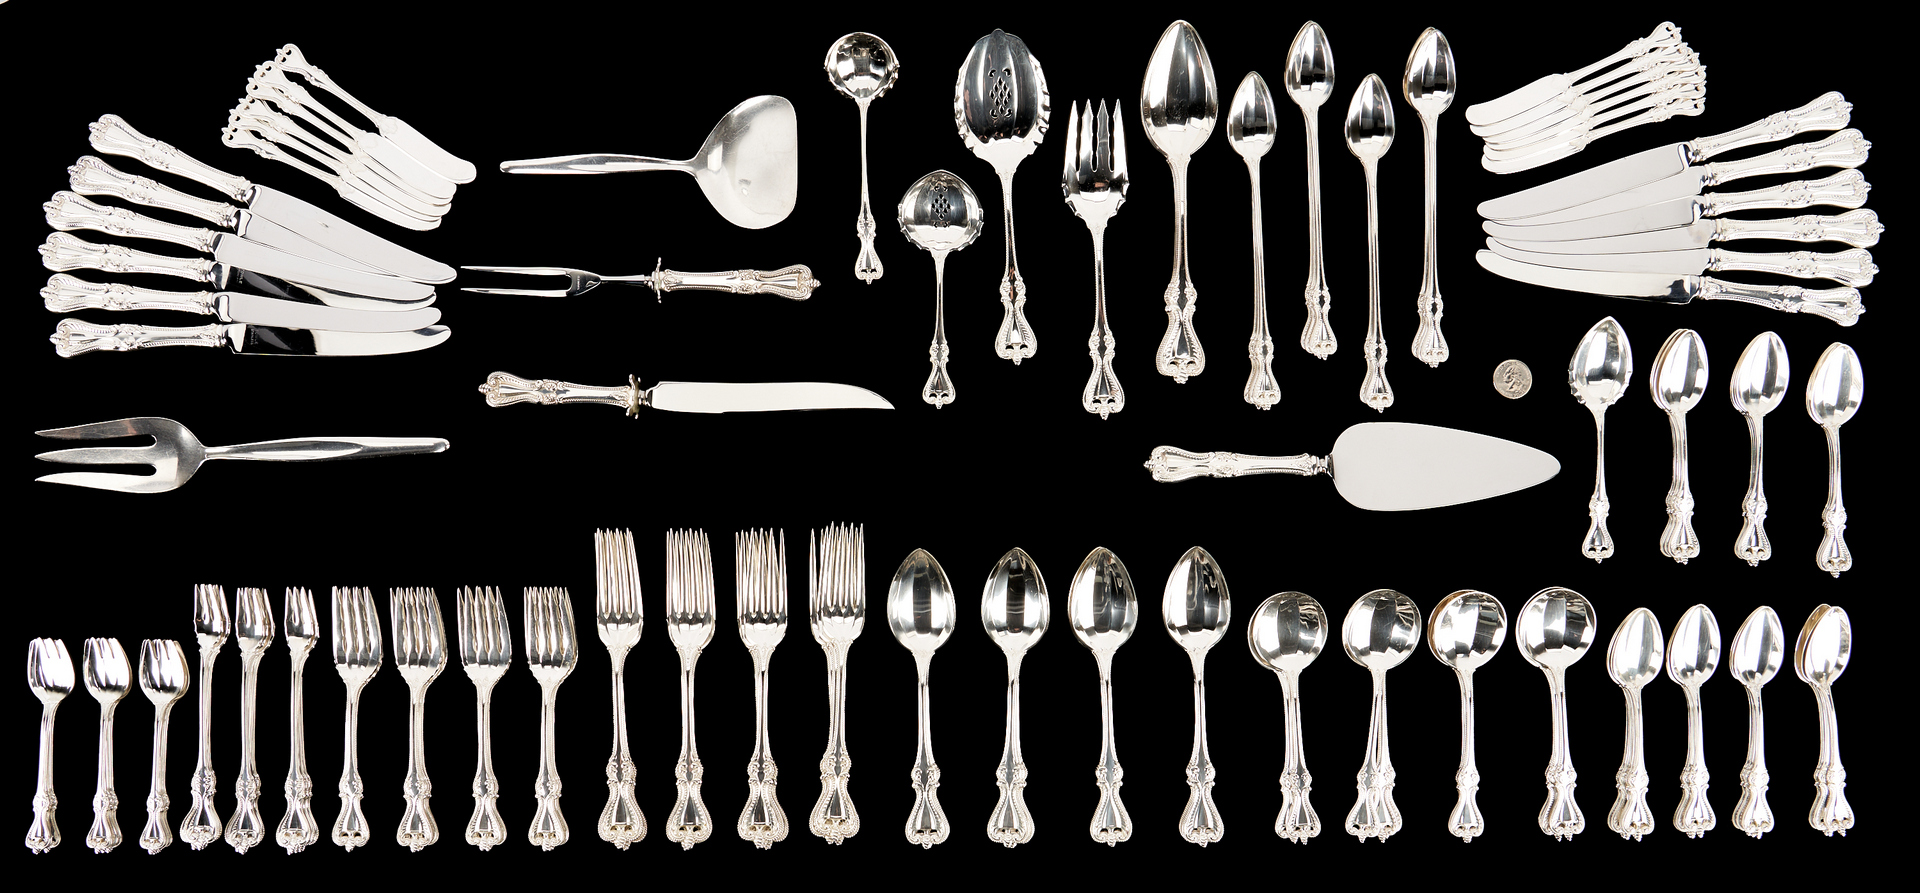 Lot 88: 147 Pcs. Towle Sterling Silver Flatware, incl. Old Colonial